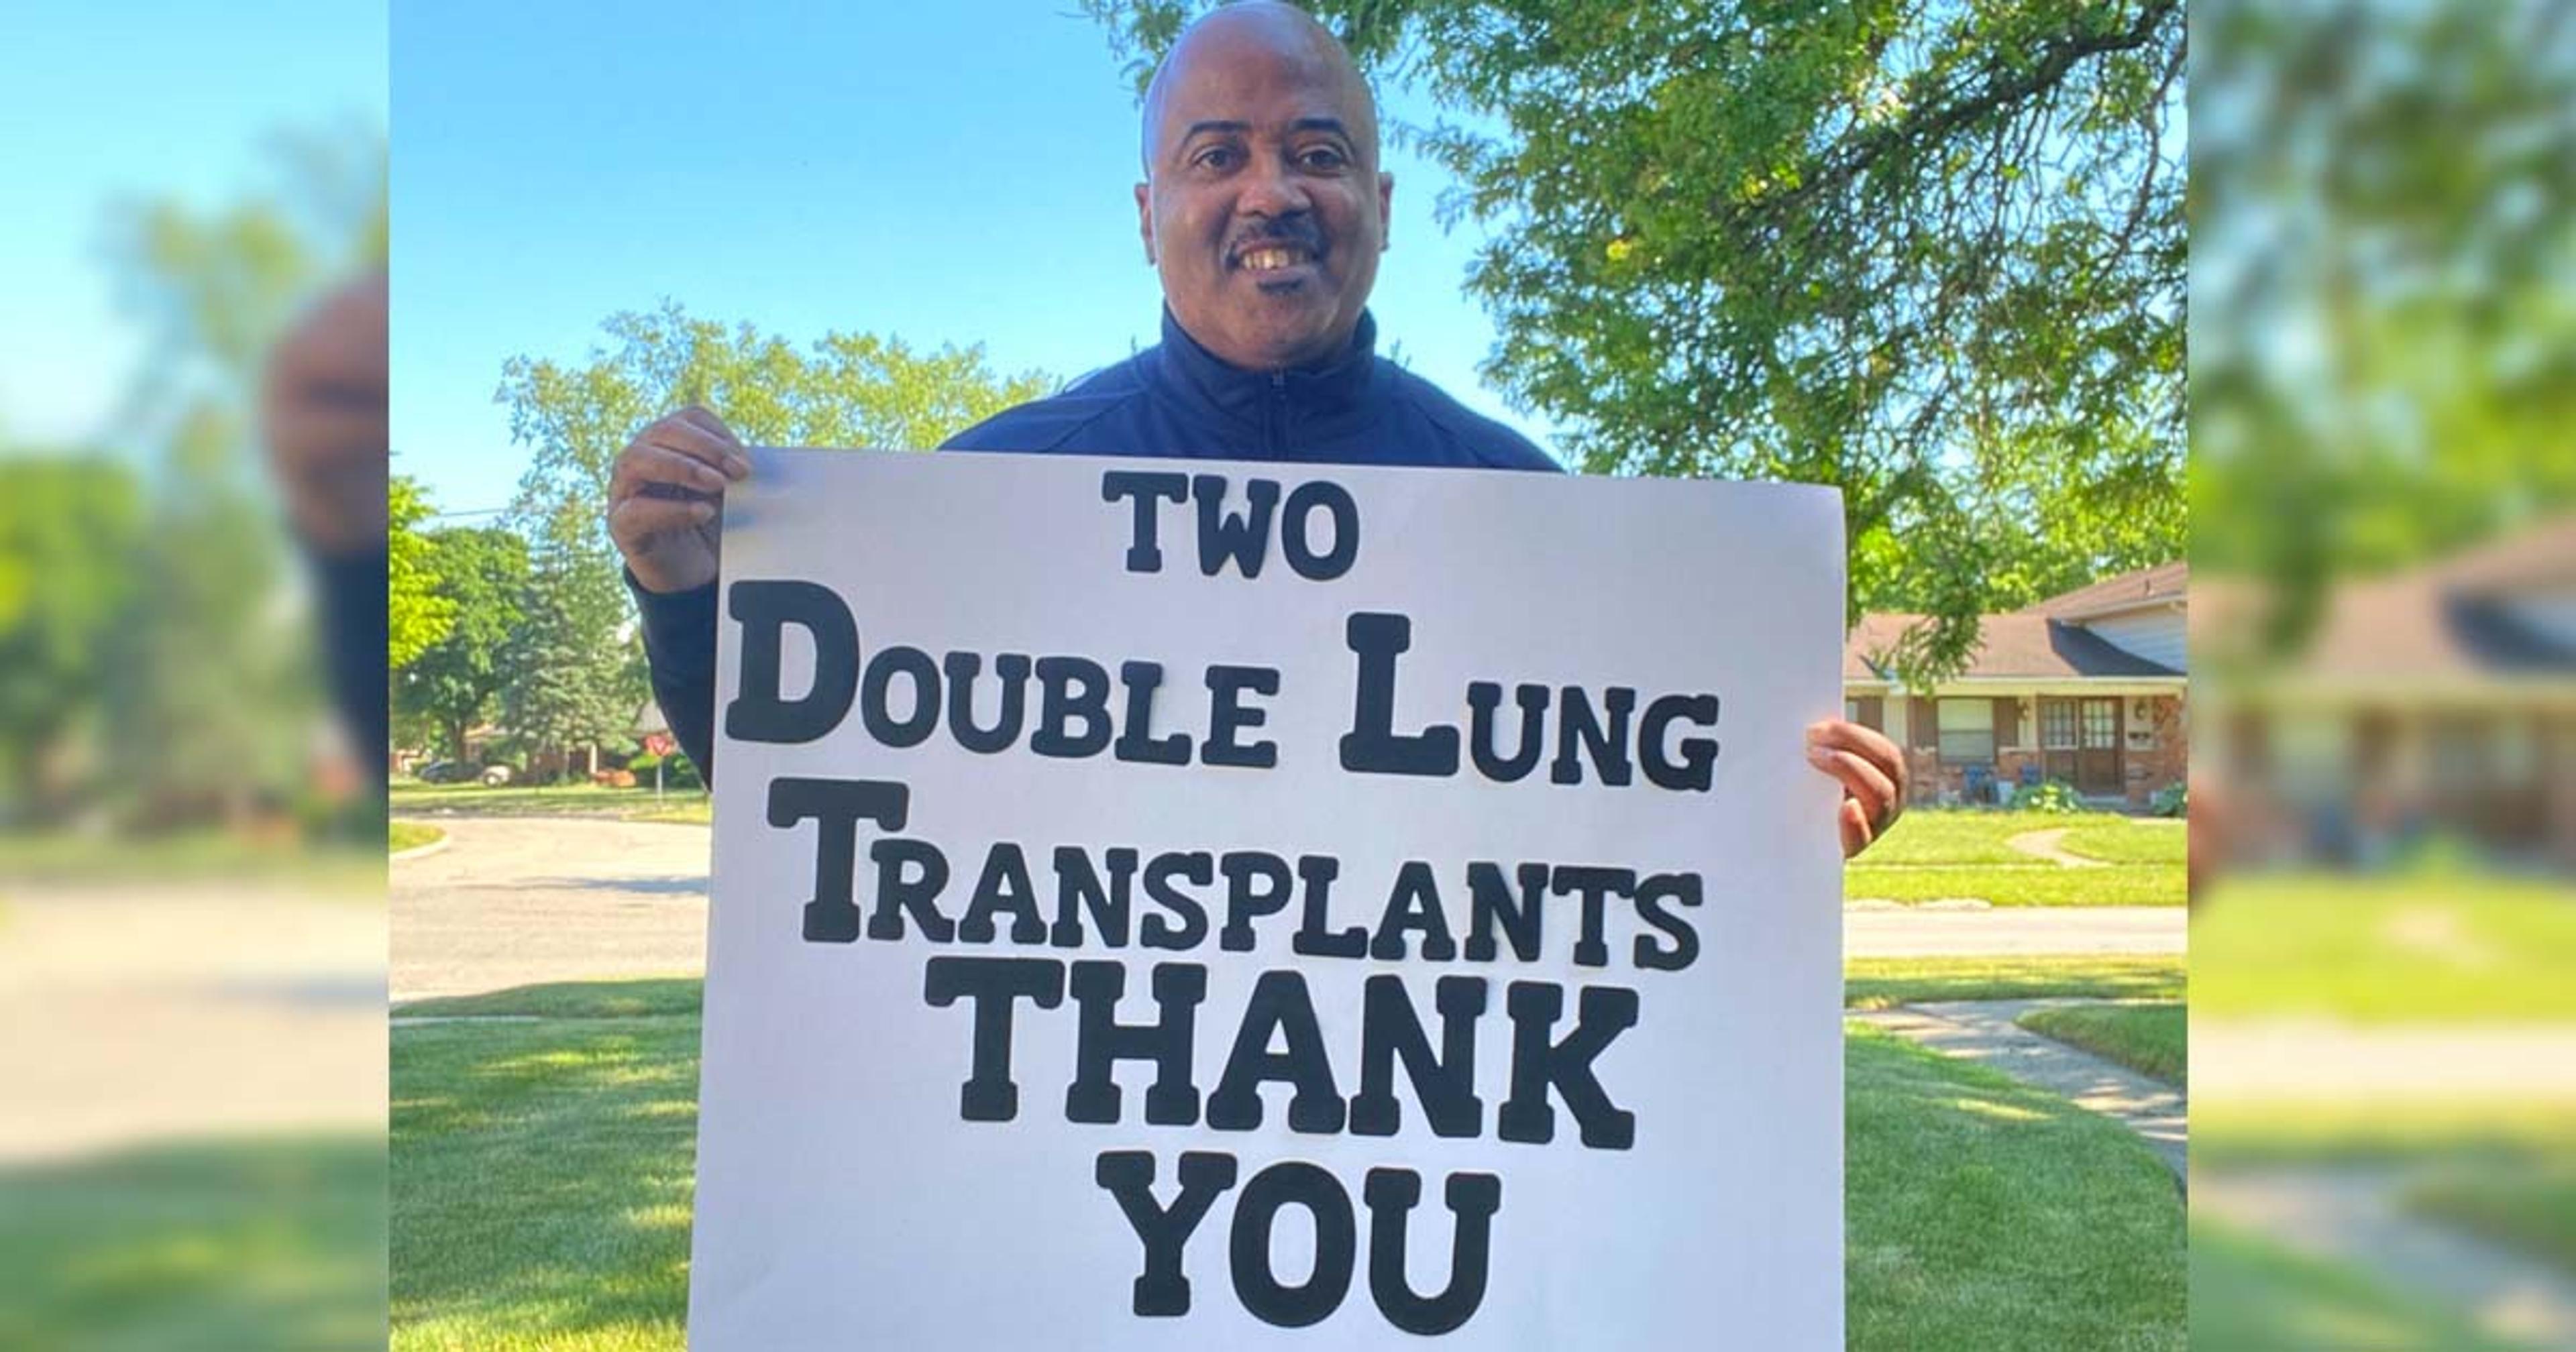 Michael Love is healthier than he's been in years after two double lung transplants. Now he educates others and spreads organ donation awareness.